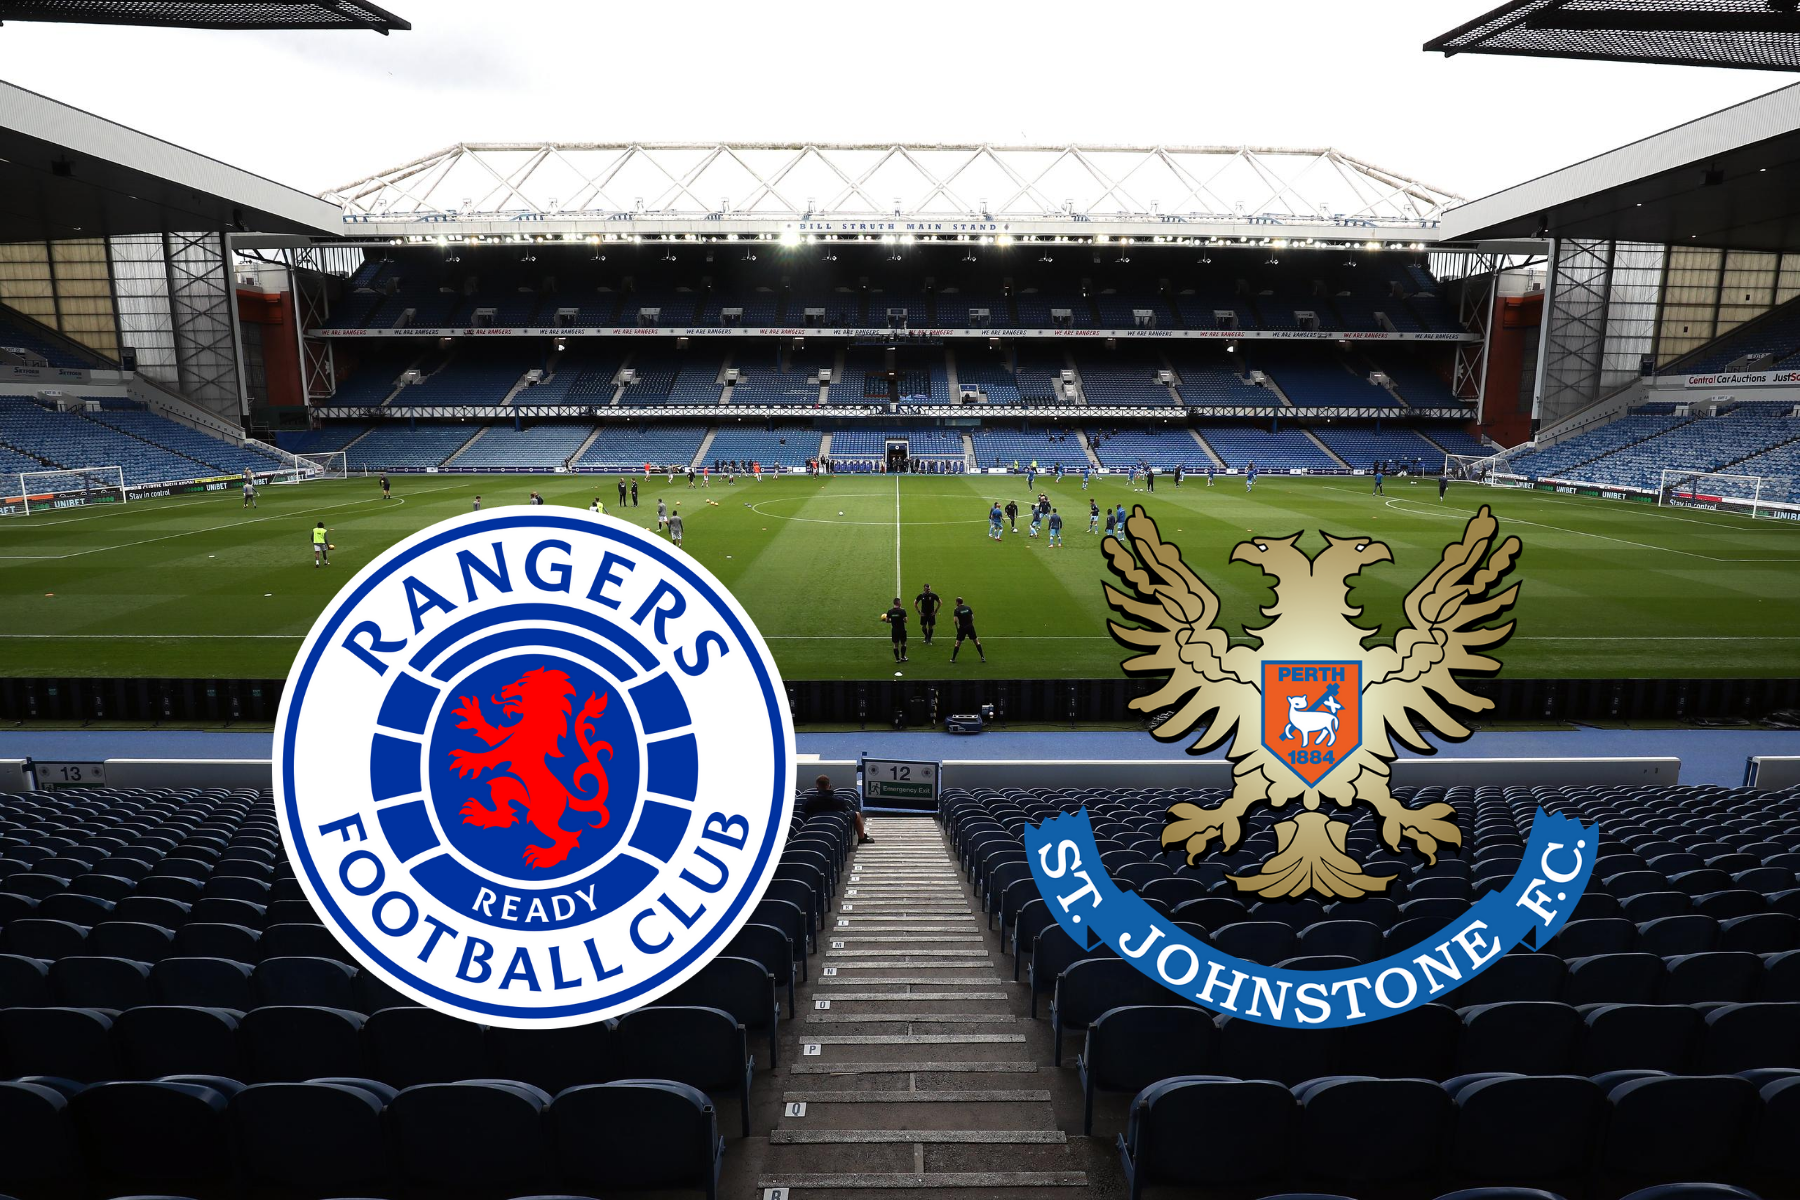 Rangers 1 St Johnstone 0 LIVE: Borna Barisic gives Steven Gerrard's side the lead at Ibrox